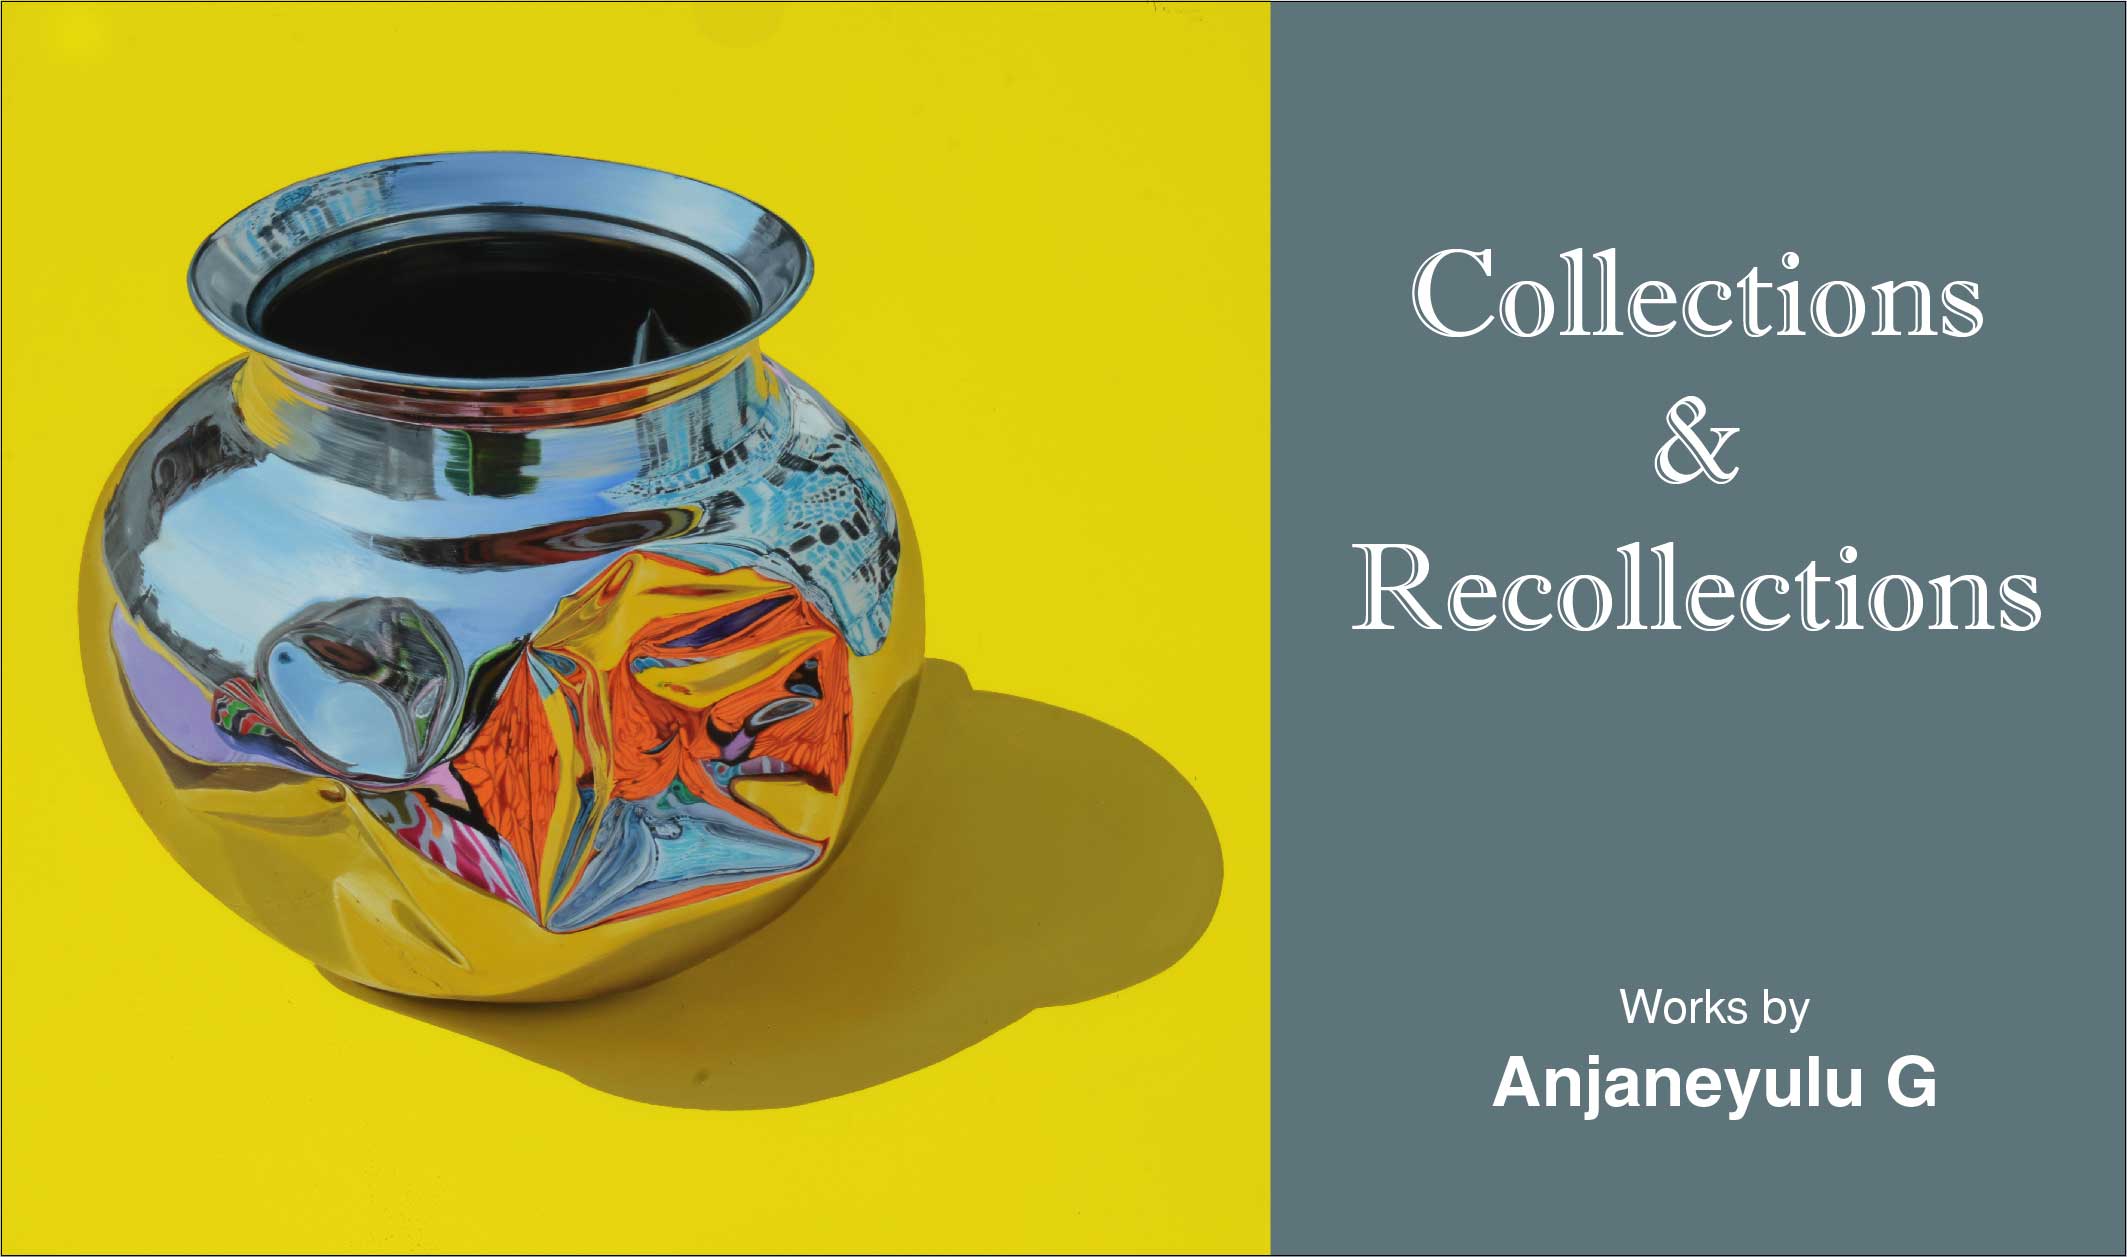 COLLECTIONS AND RECOLLECTIONS | WORKS BY ANJANEYULU G.